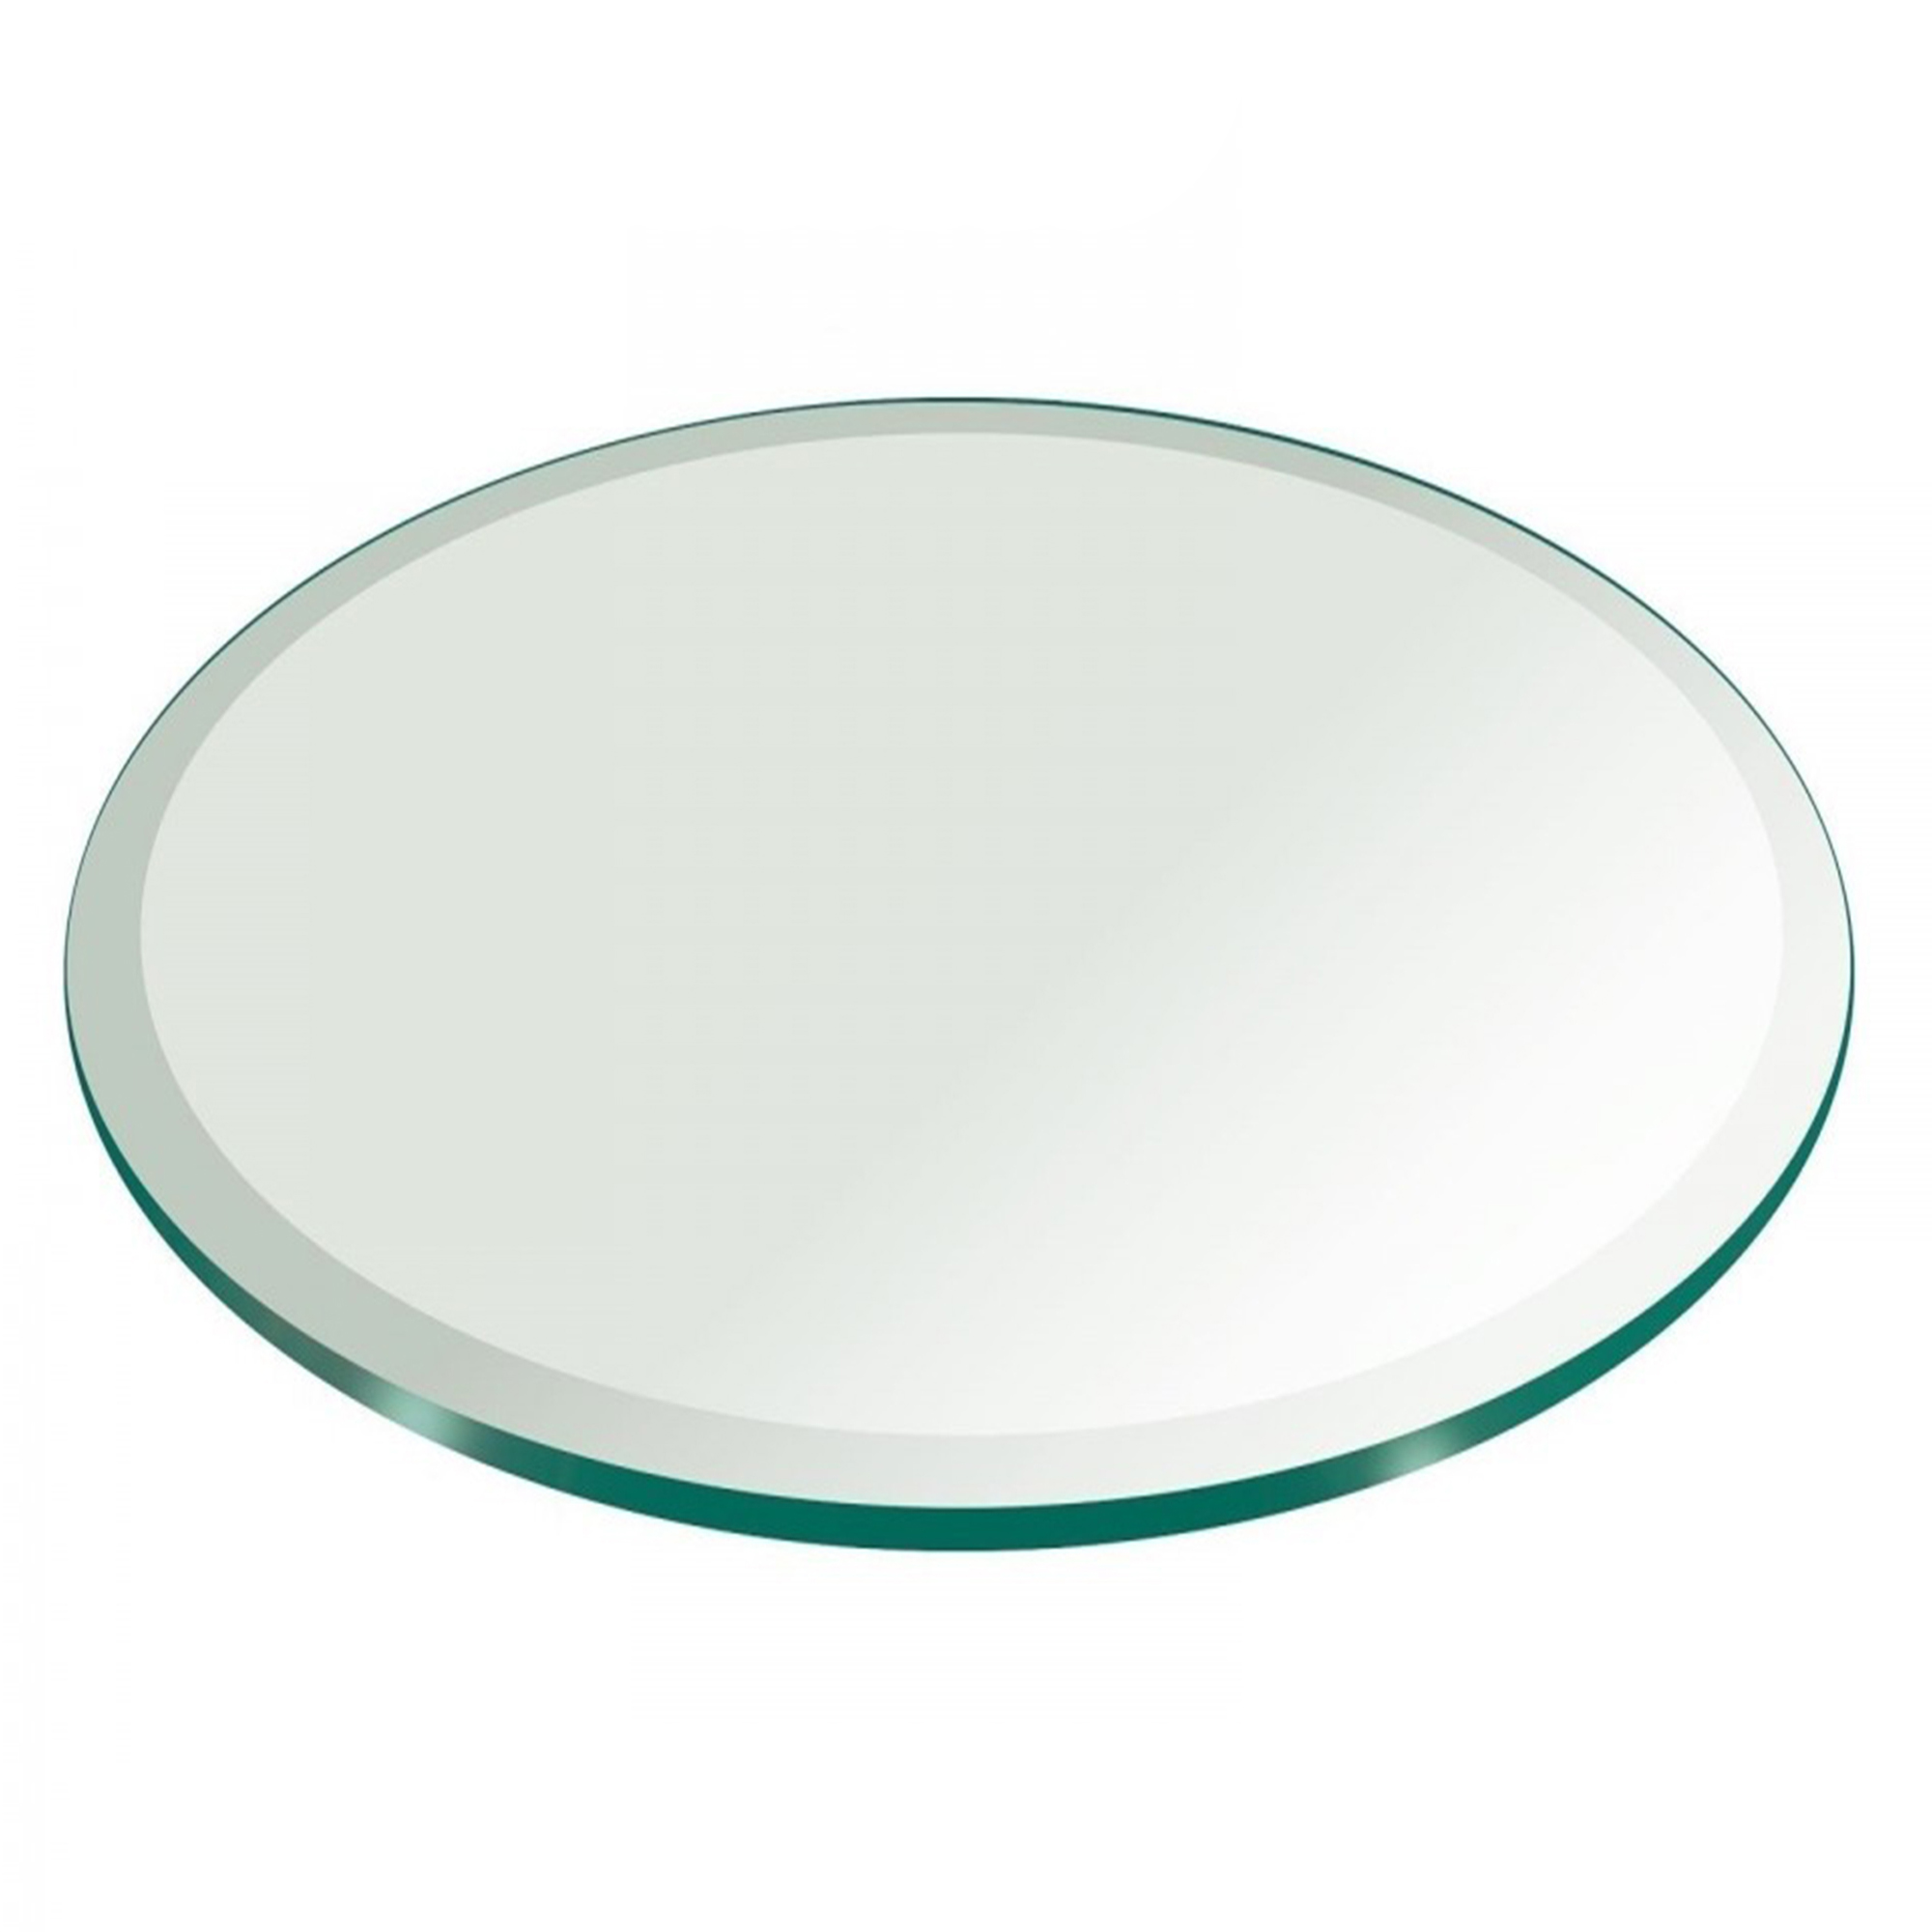 Round Glass Dining Table Tops, How Do You Get Scratches Out Of Glass Table Tops